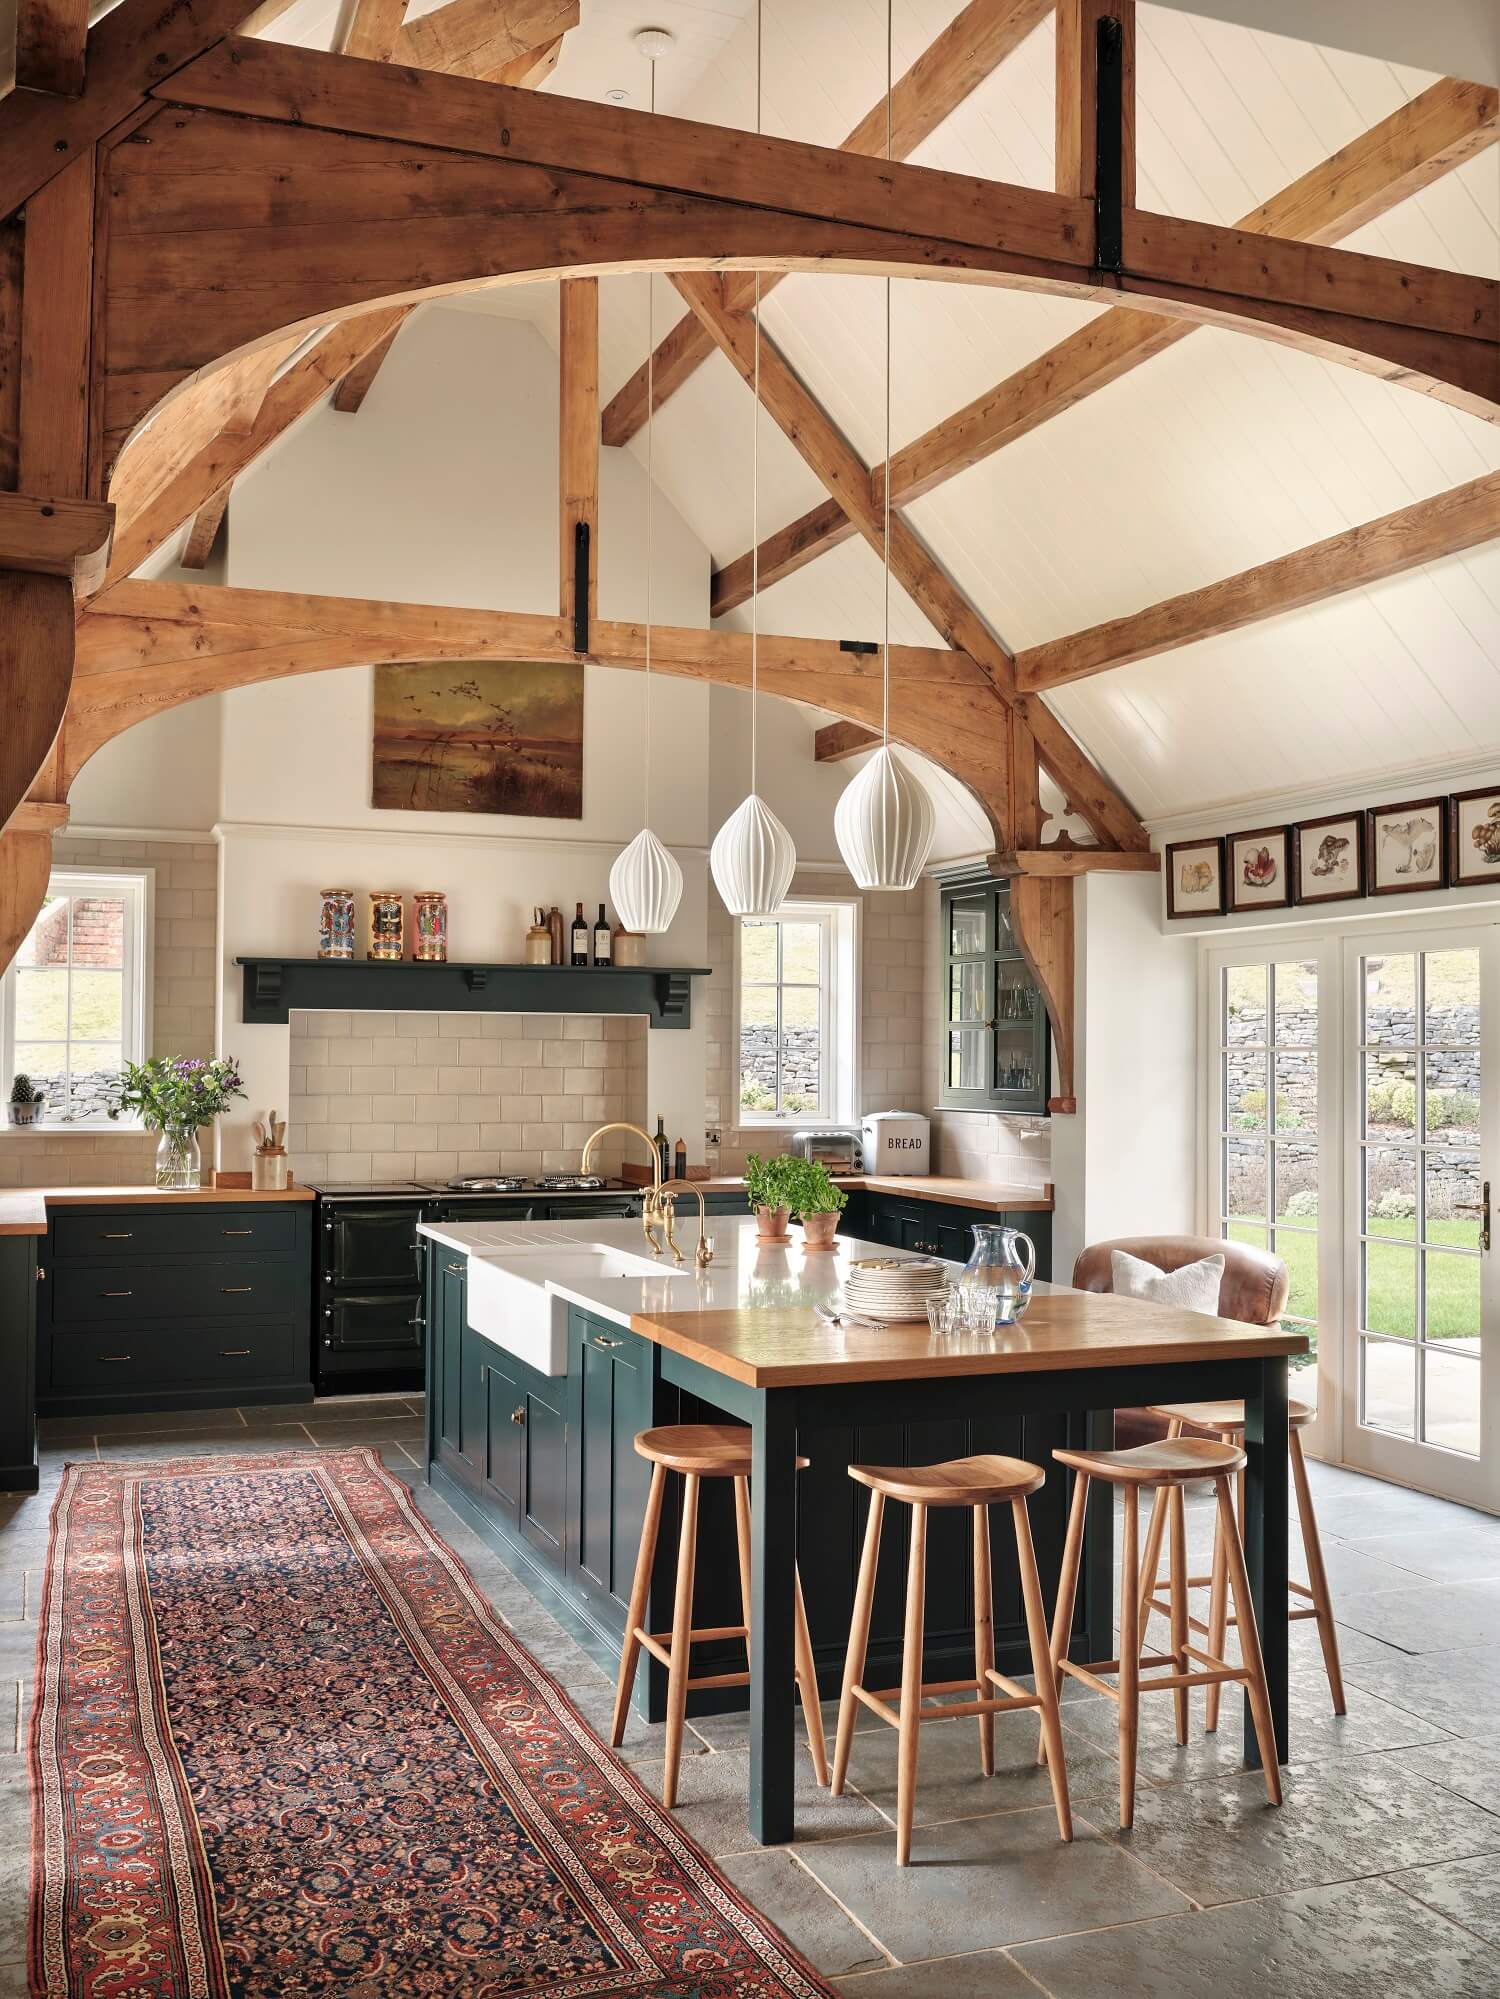 A Grand Family Kitchen in an English Country House